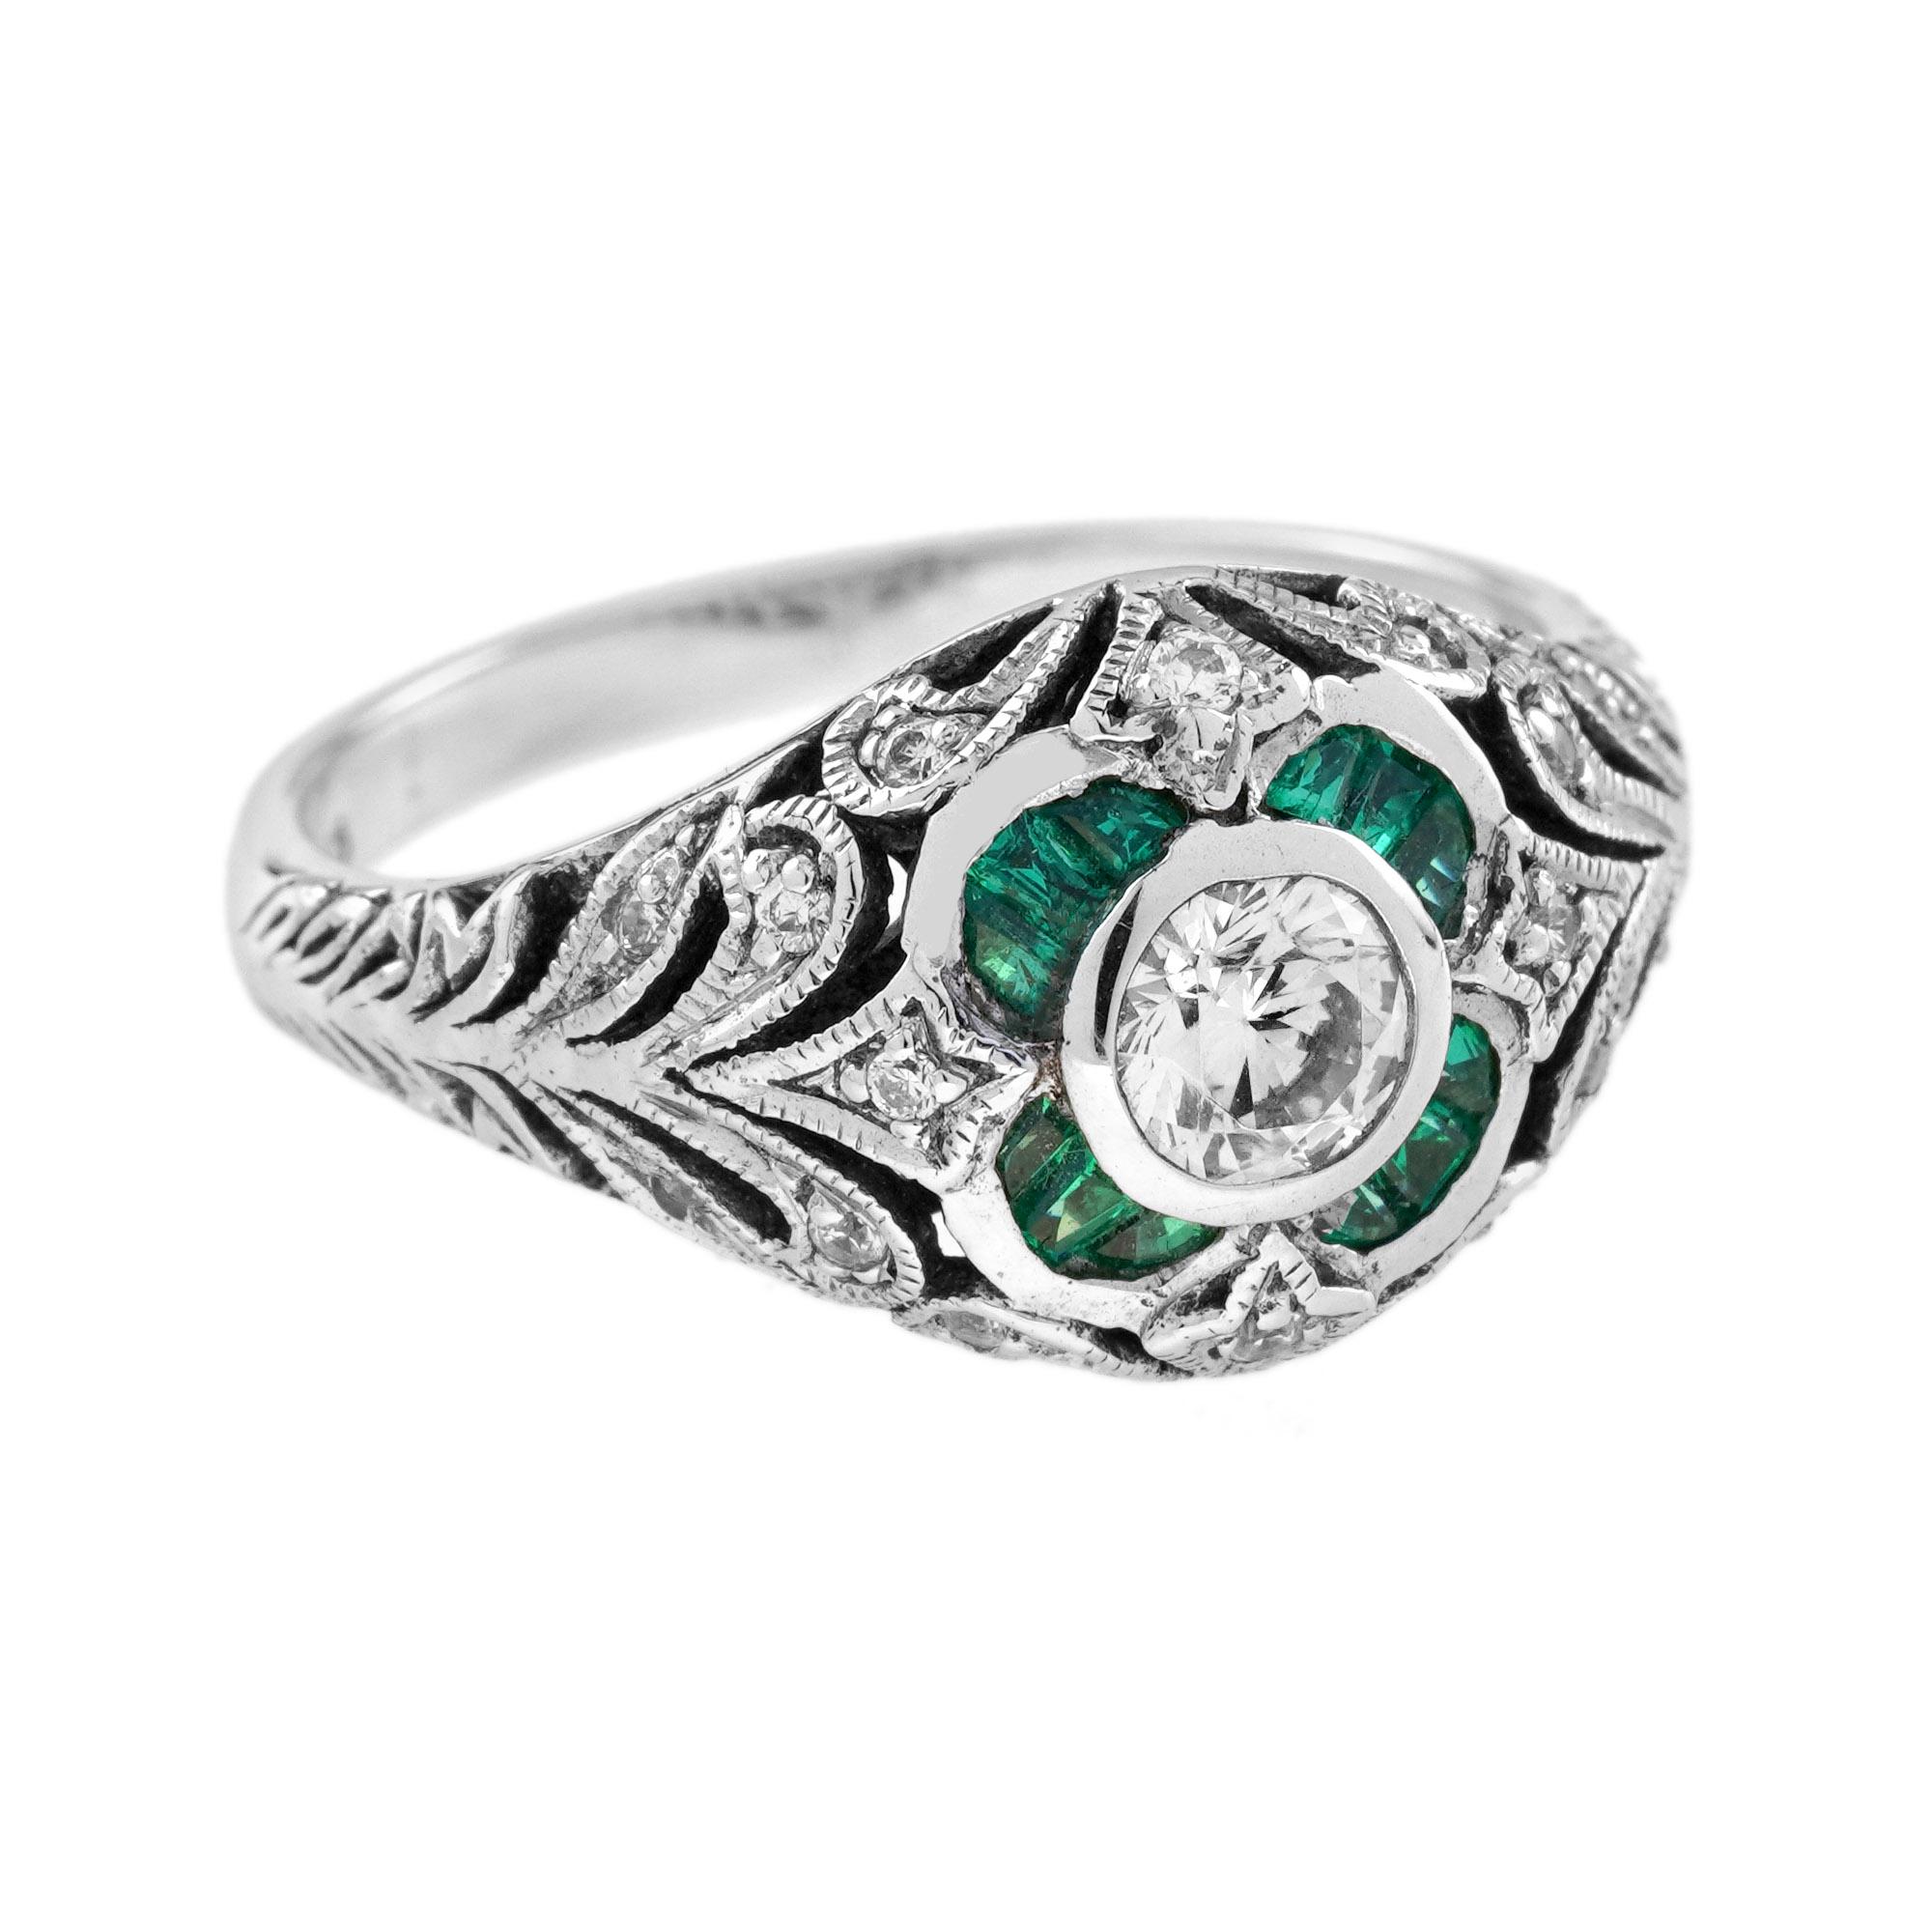 Round Cut Diamond and Emerald Art Deco Style Floral Engraved Ring in 18K White Gold For Sale